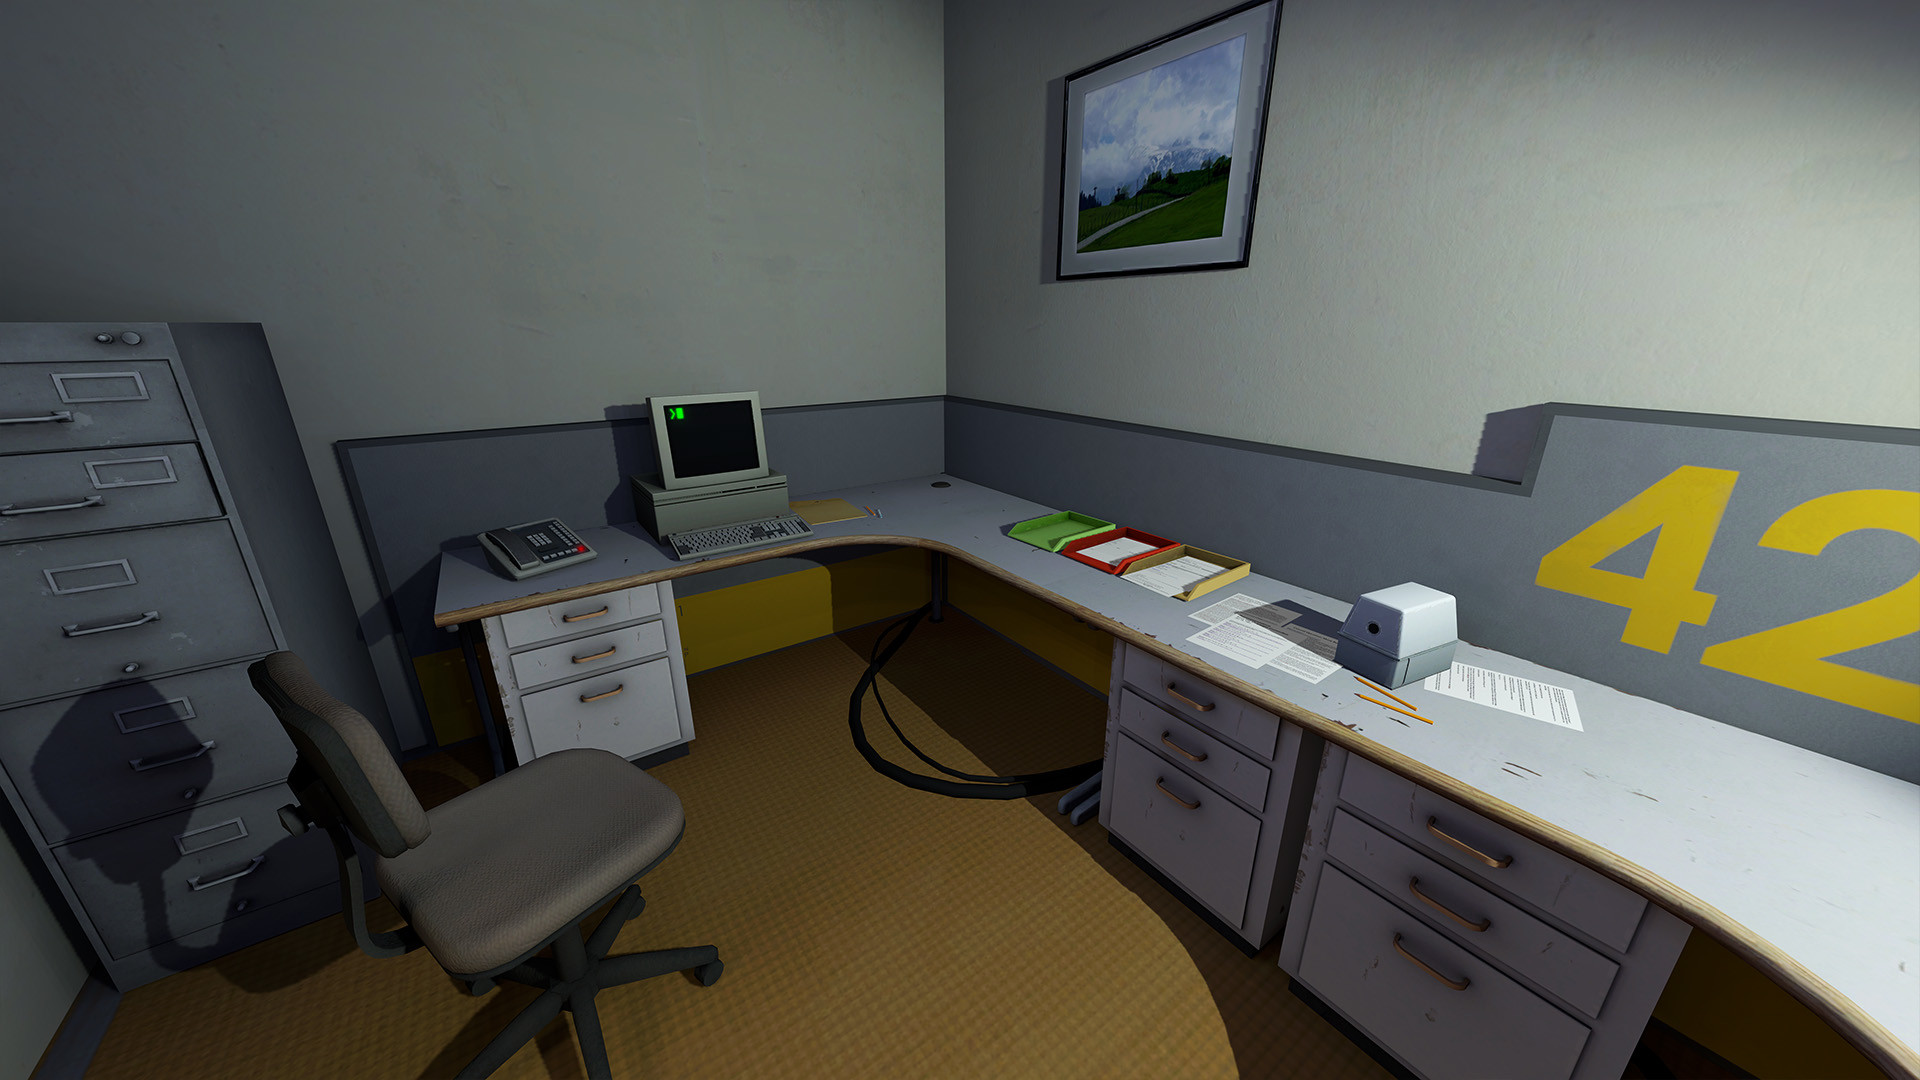 The Stanley Parable: Ultra Deluxe Steam Account